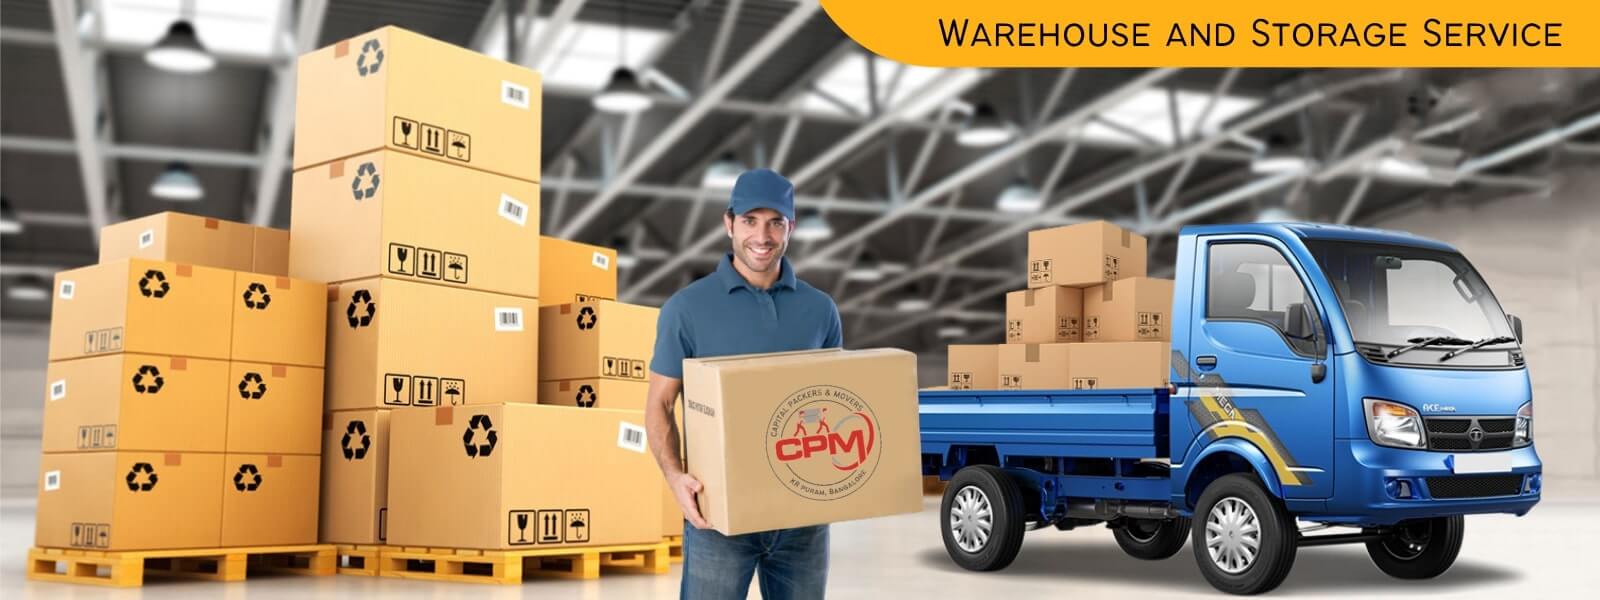 Capital Packers and Movers 